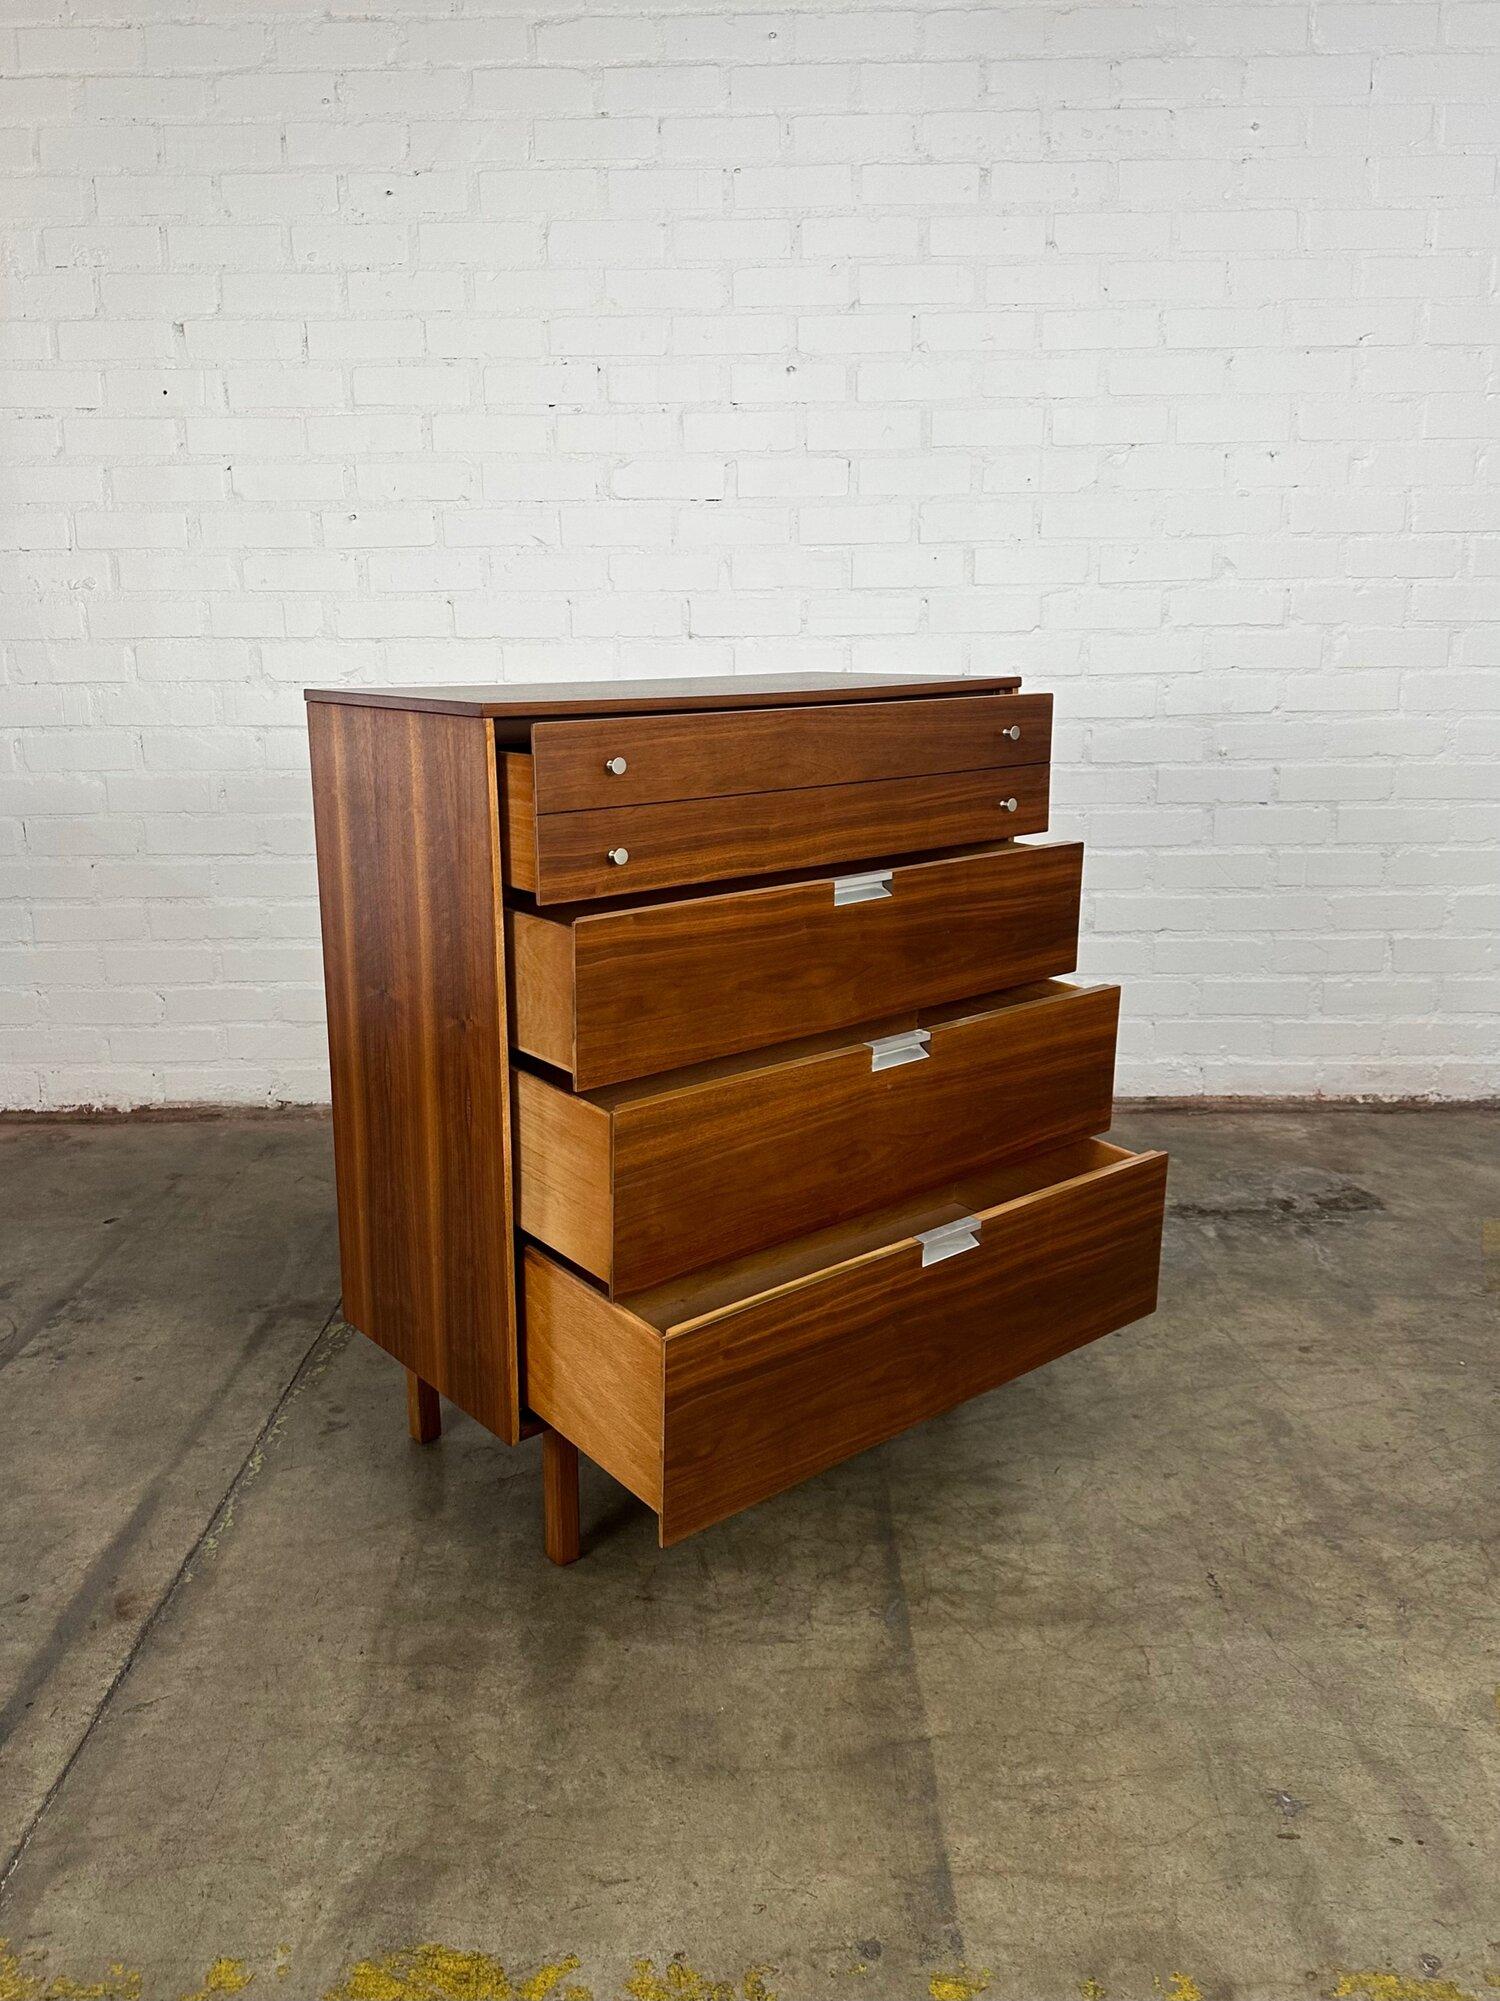 Dimensions: W36 D18 H43

Vintage highboy with chrome original hardware with four smooth sliding drawers with solid wood drawers, walnut veneer on the exterior with angled legs and deep drawers. Great restored condition with minor sign of wear.